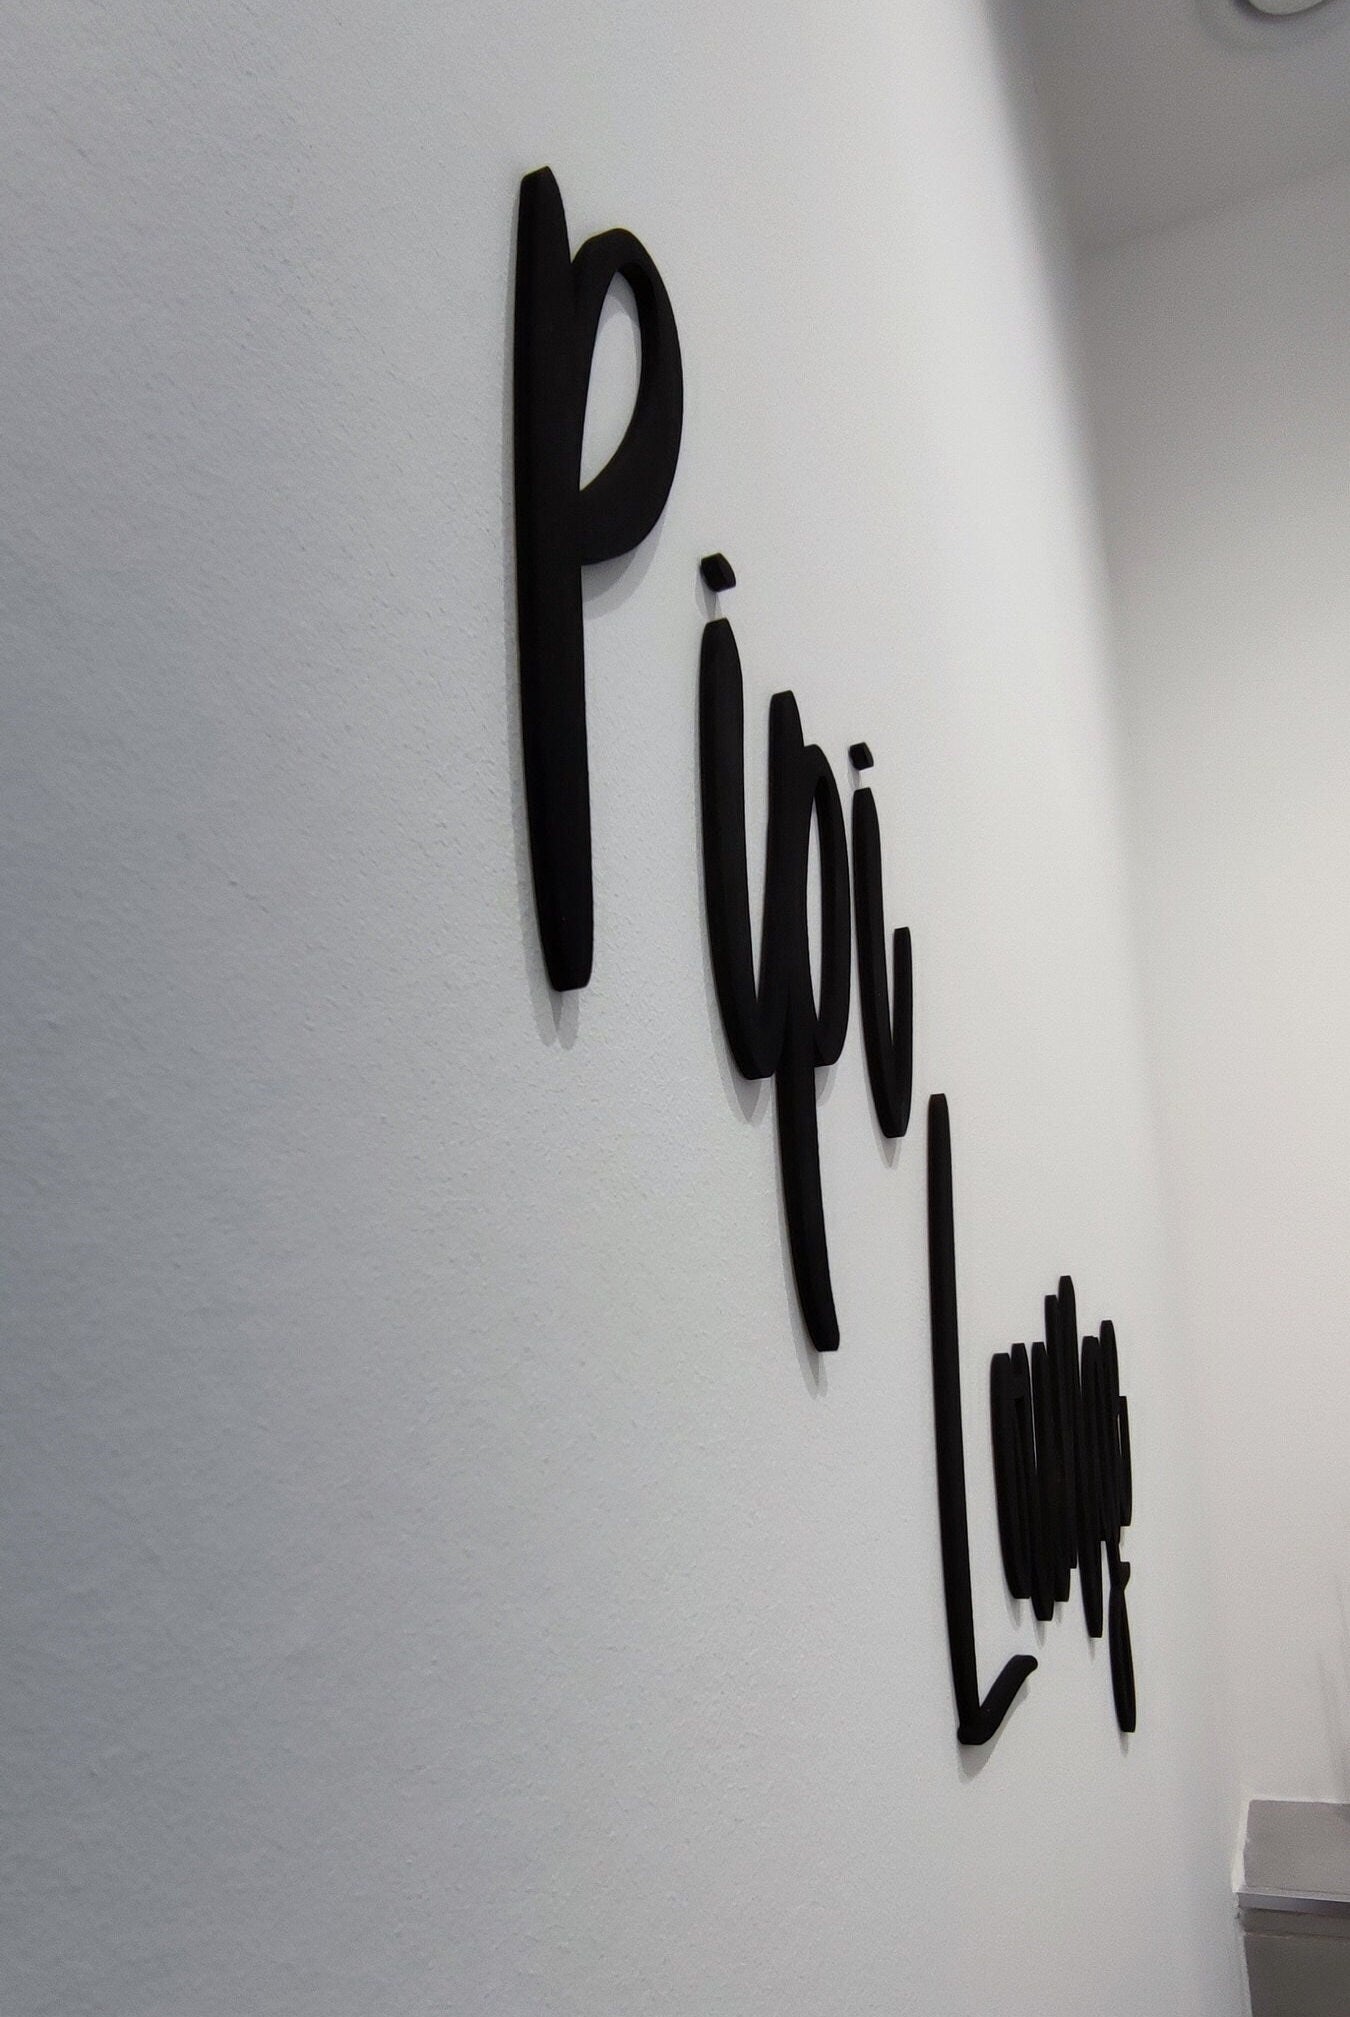 Pipi Lounge lettering for the wall/bathroom decoration/bathroom decoration/guest toilet decoration/lettering for the wall/wooden lettering/toilet